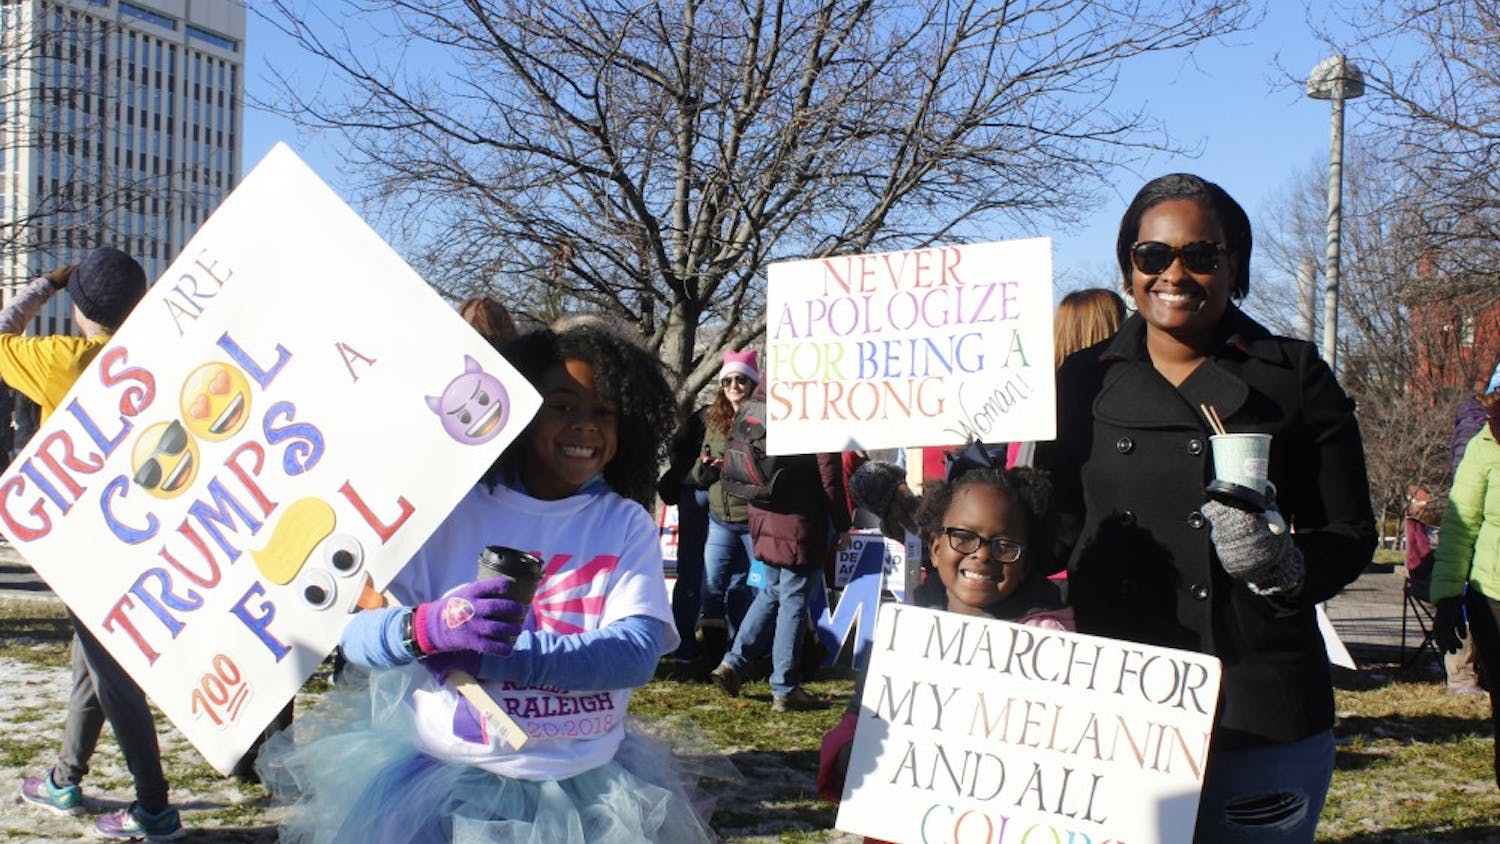 (From left) Kayla Dunson, Cheyloh Scott, and Jennifer Grayson from Fayettville, N.C. attended Saturday's march.